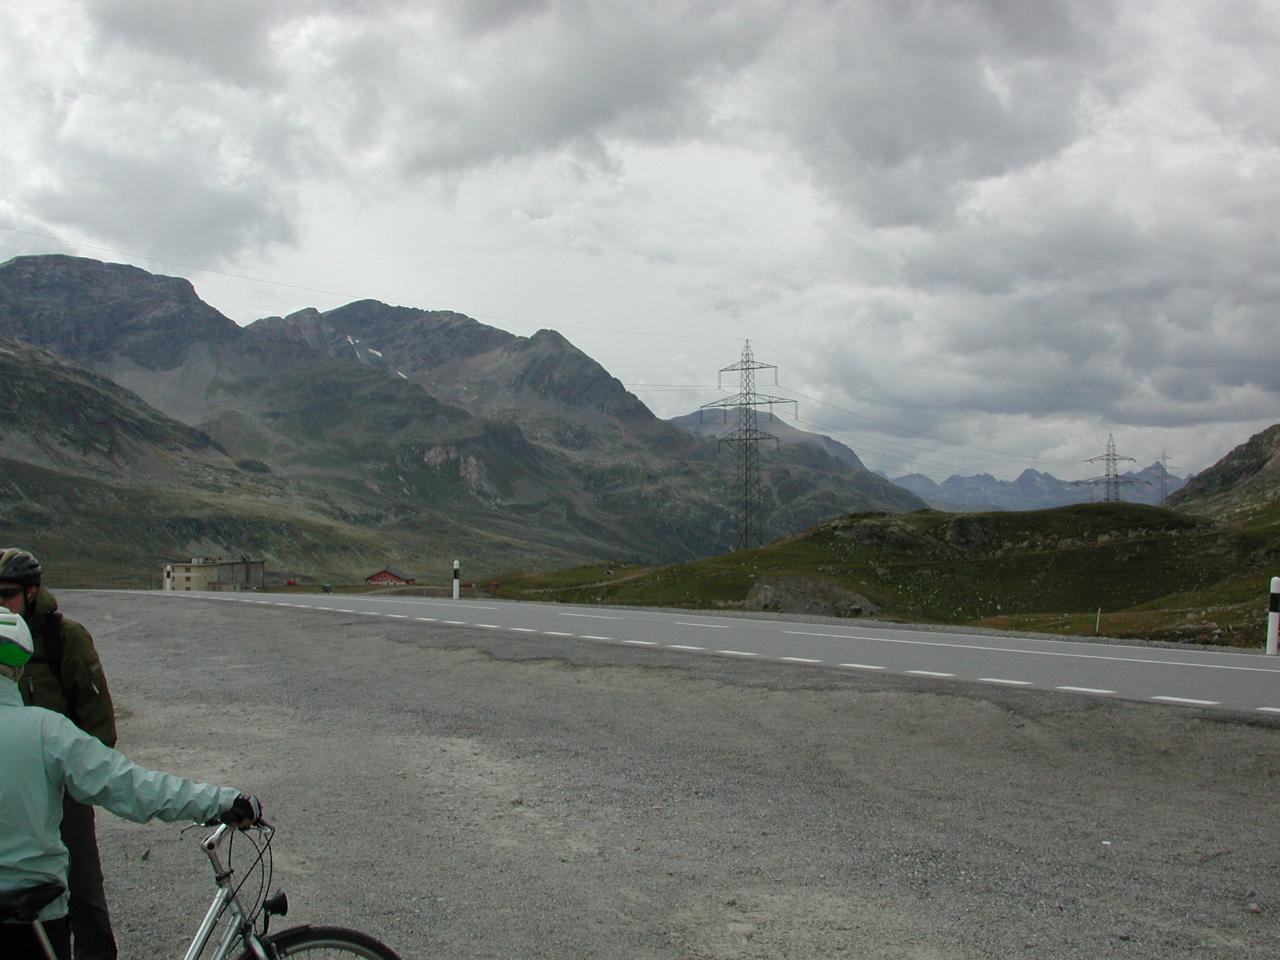 Looking roughly north further into Switzerland on Bernina Pass